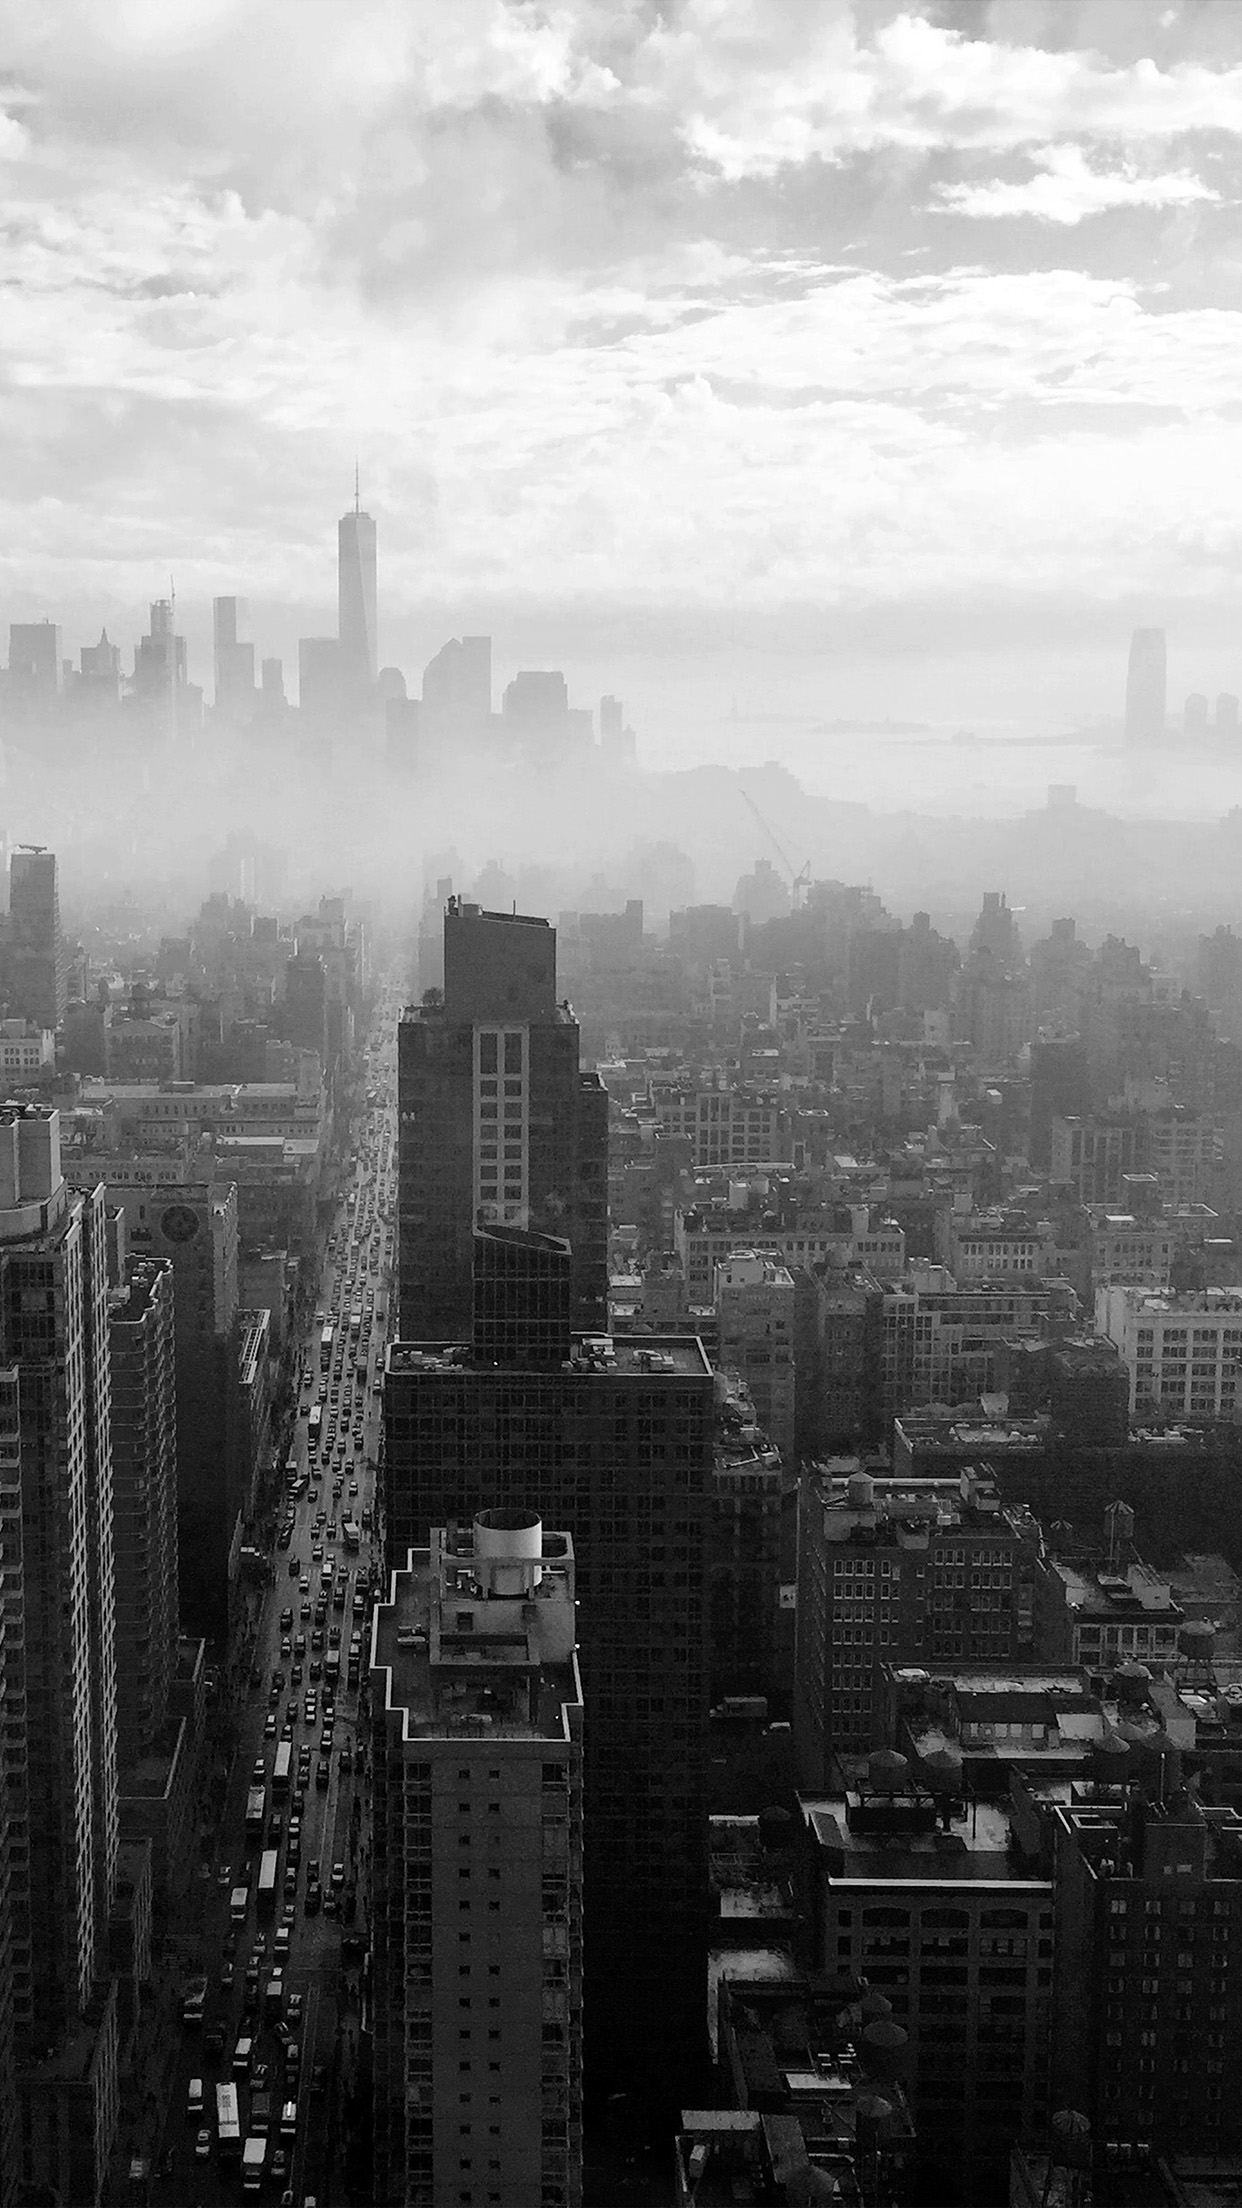 A black and white photo of a city skyline with skyscrapers and cars. - New York